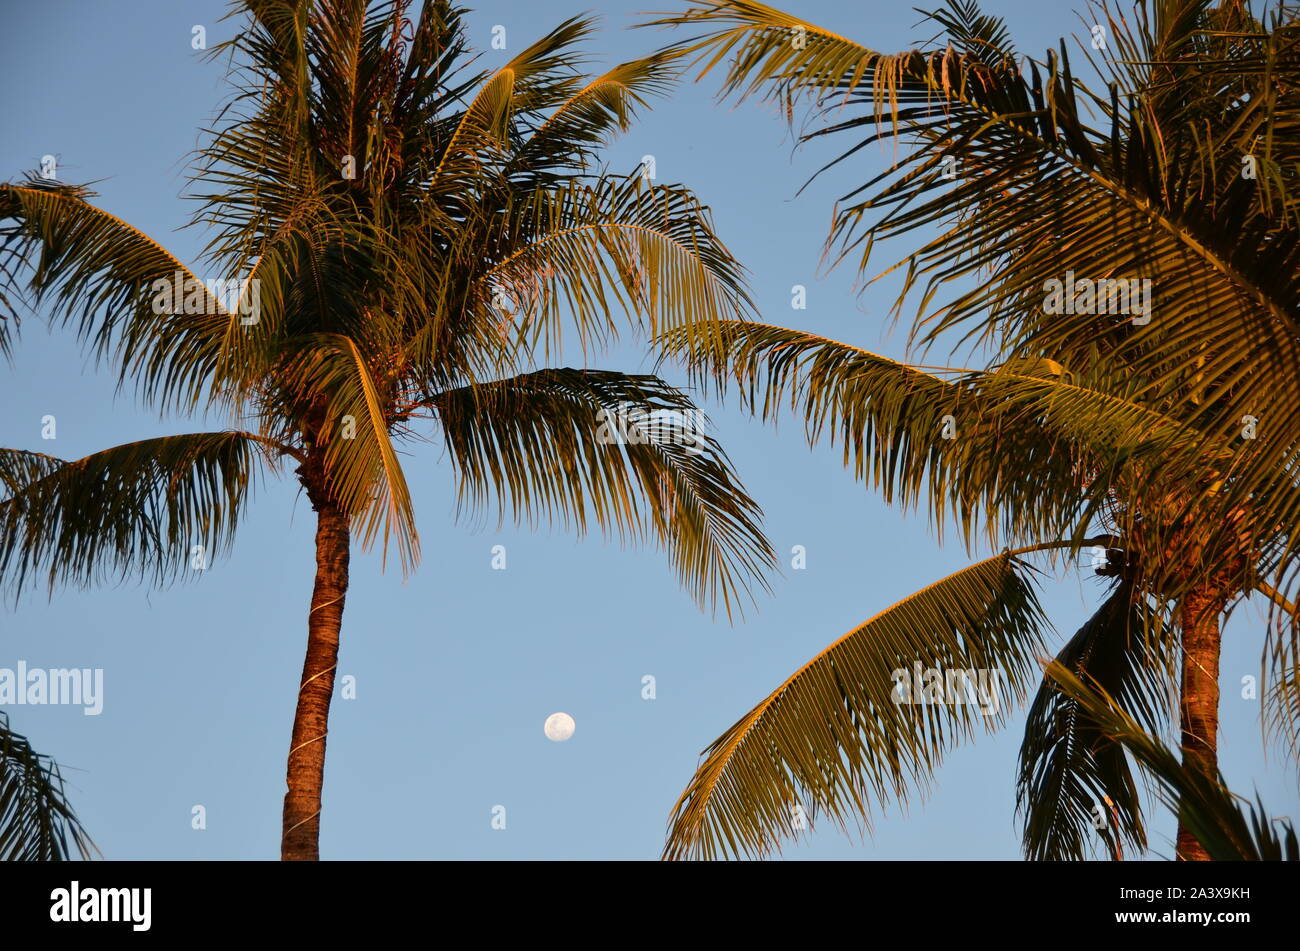 The view of the palm tree and the moon Stock Photo